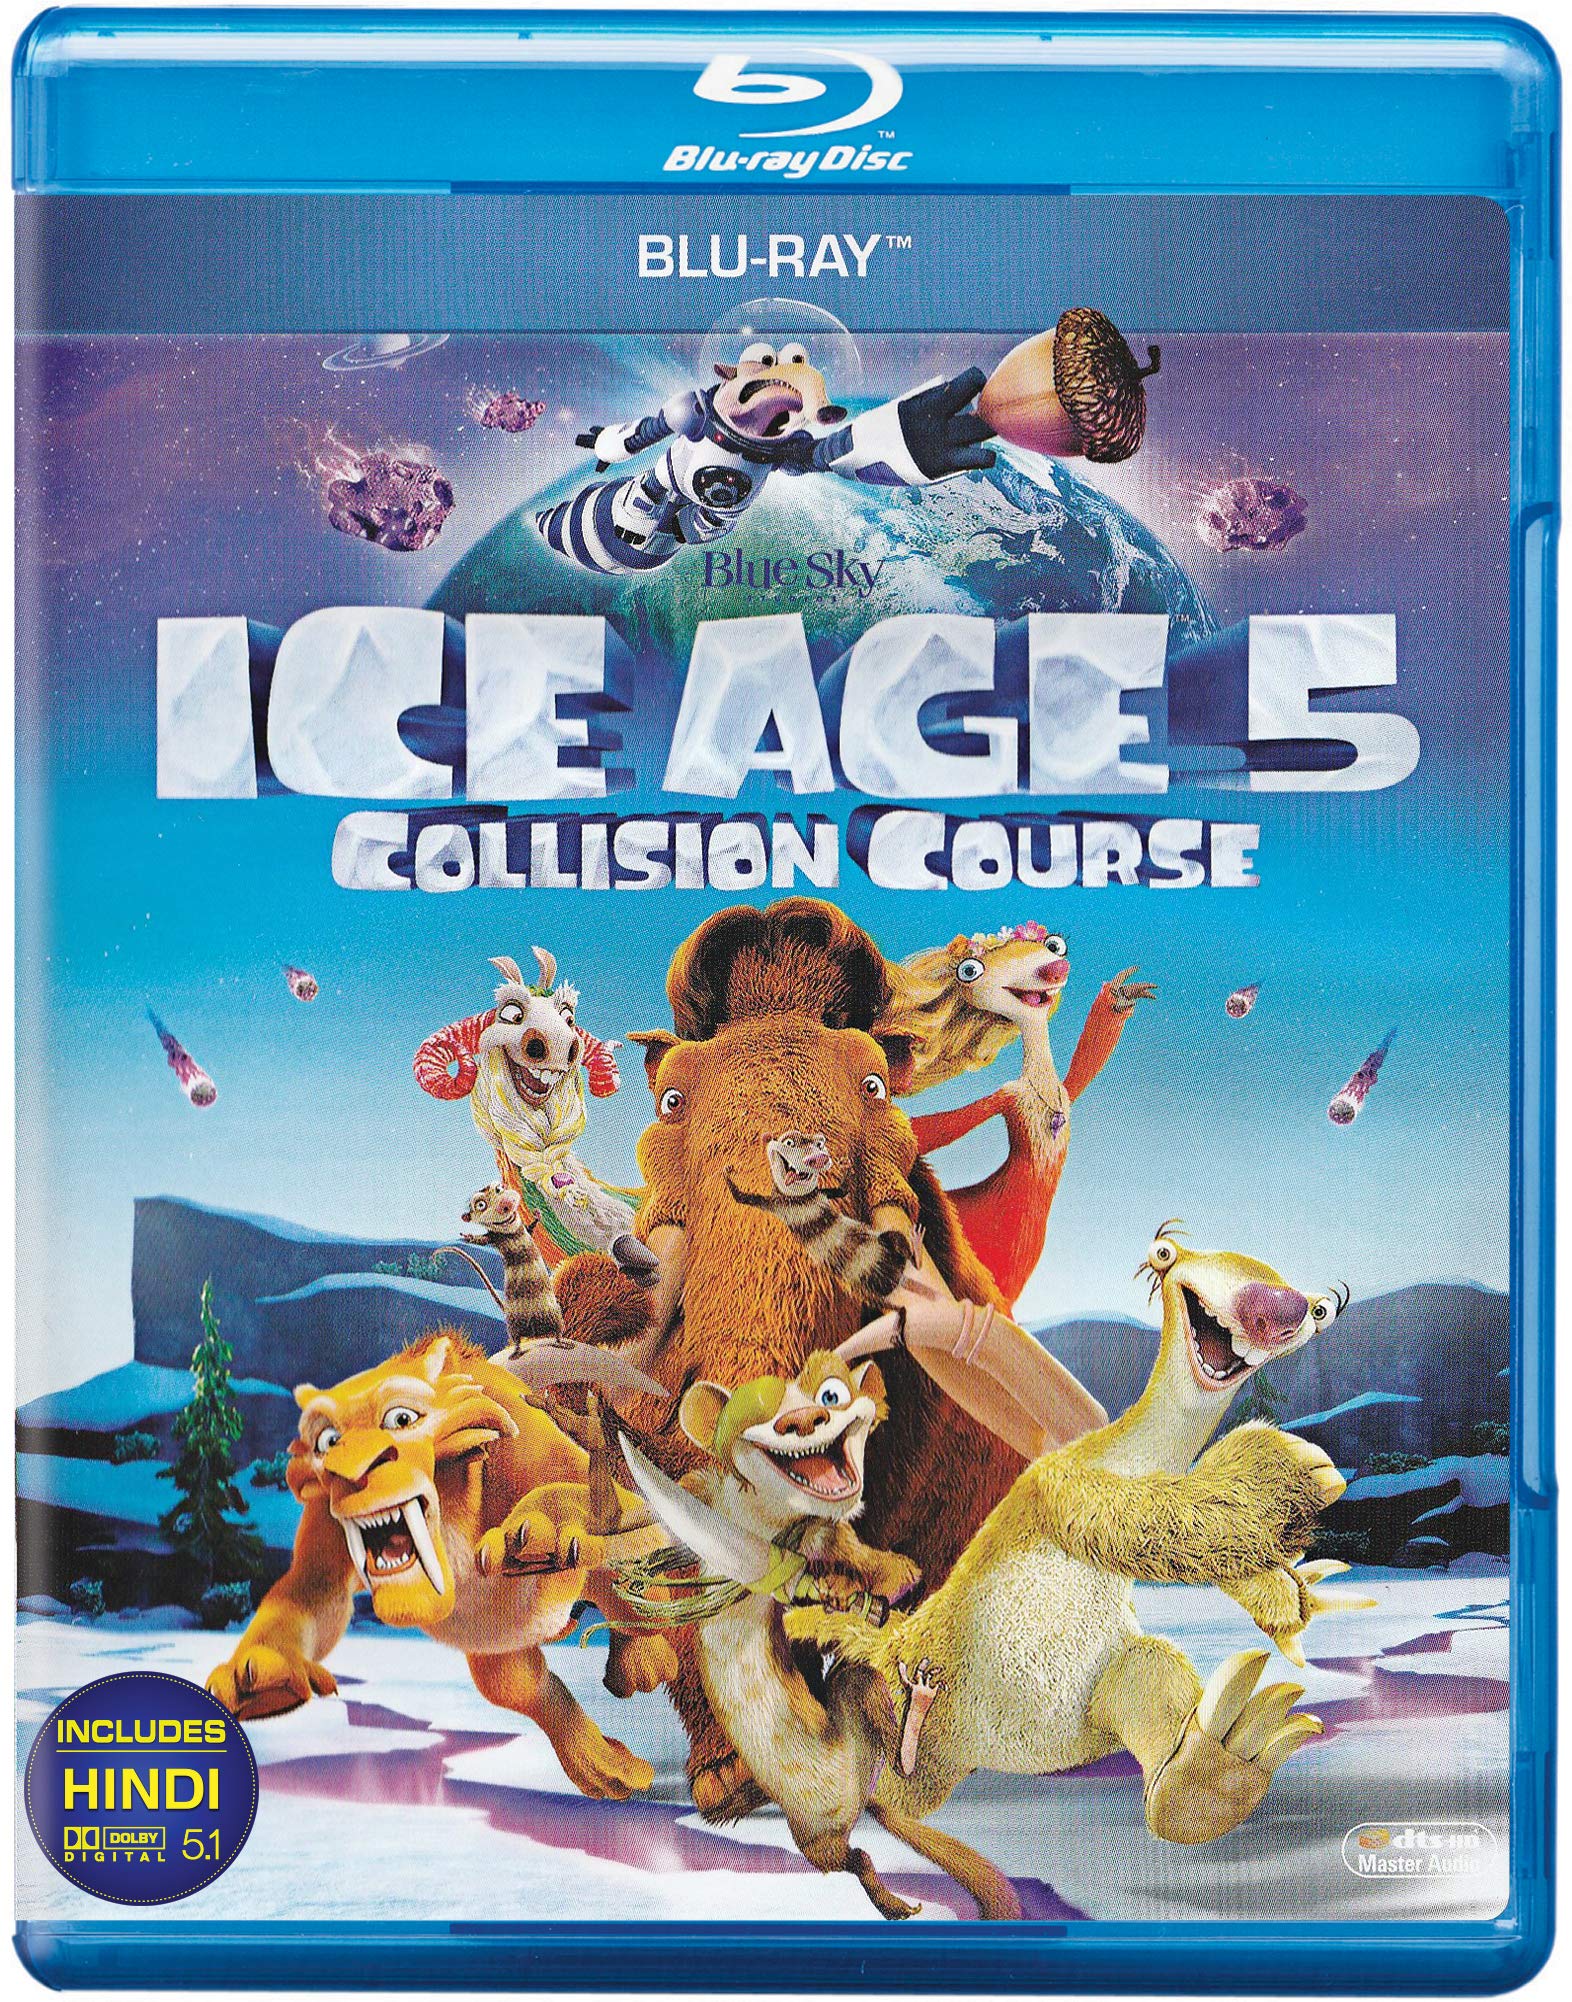 ice-age-5-collision-course-movie-purchase-or-watch-online-2